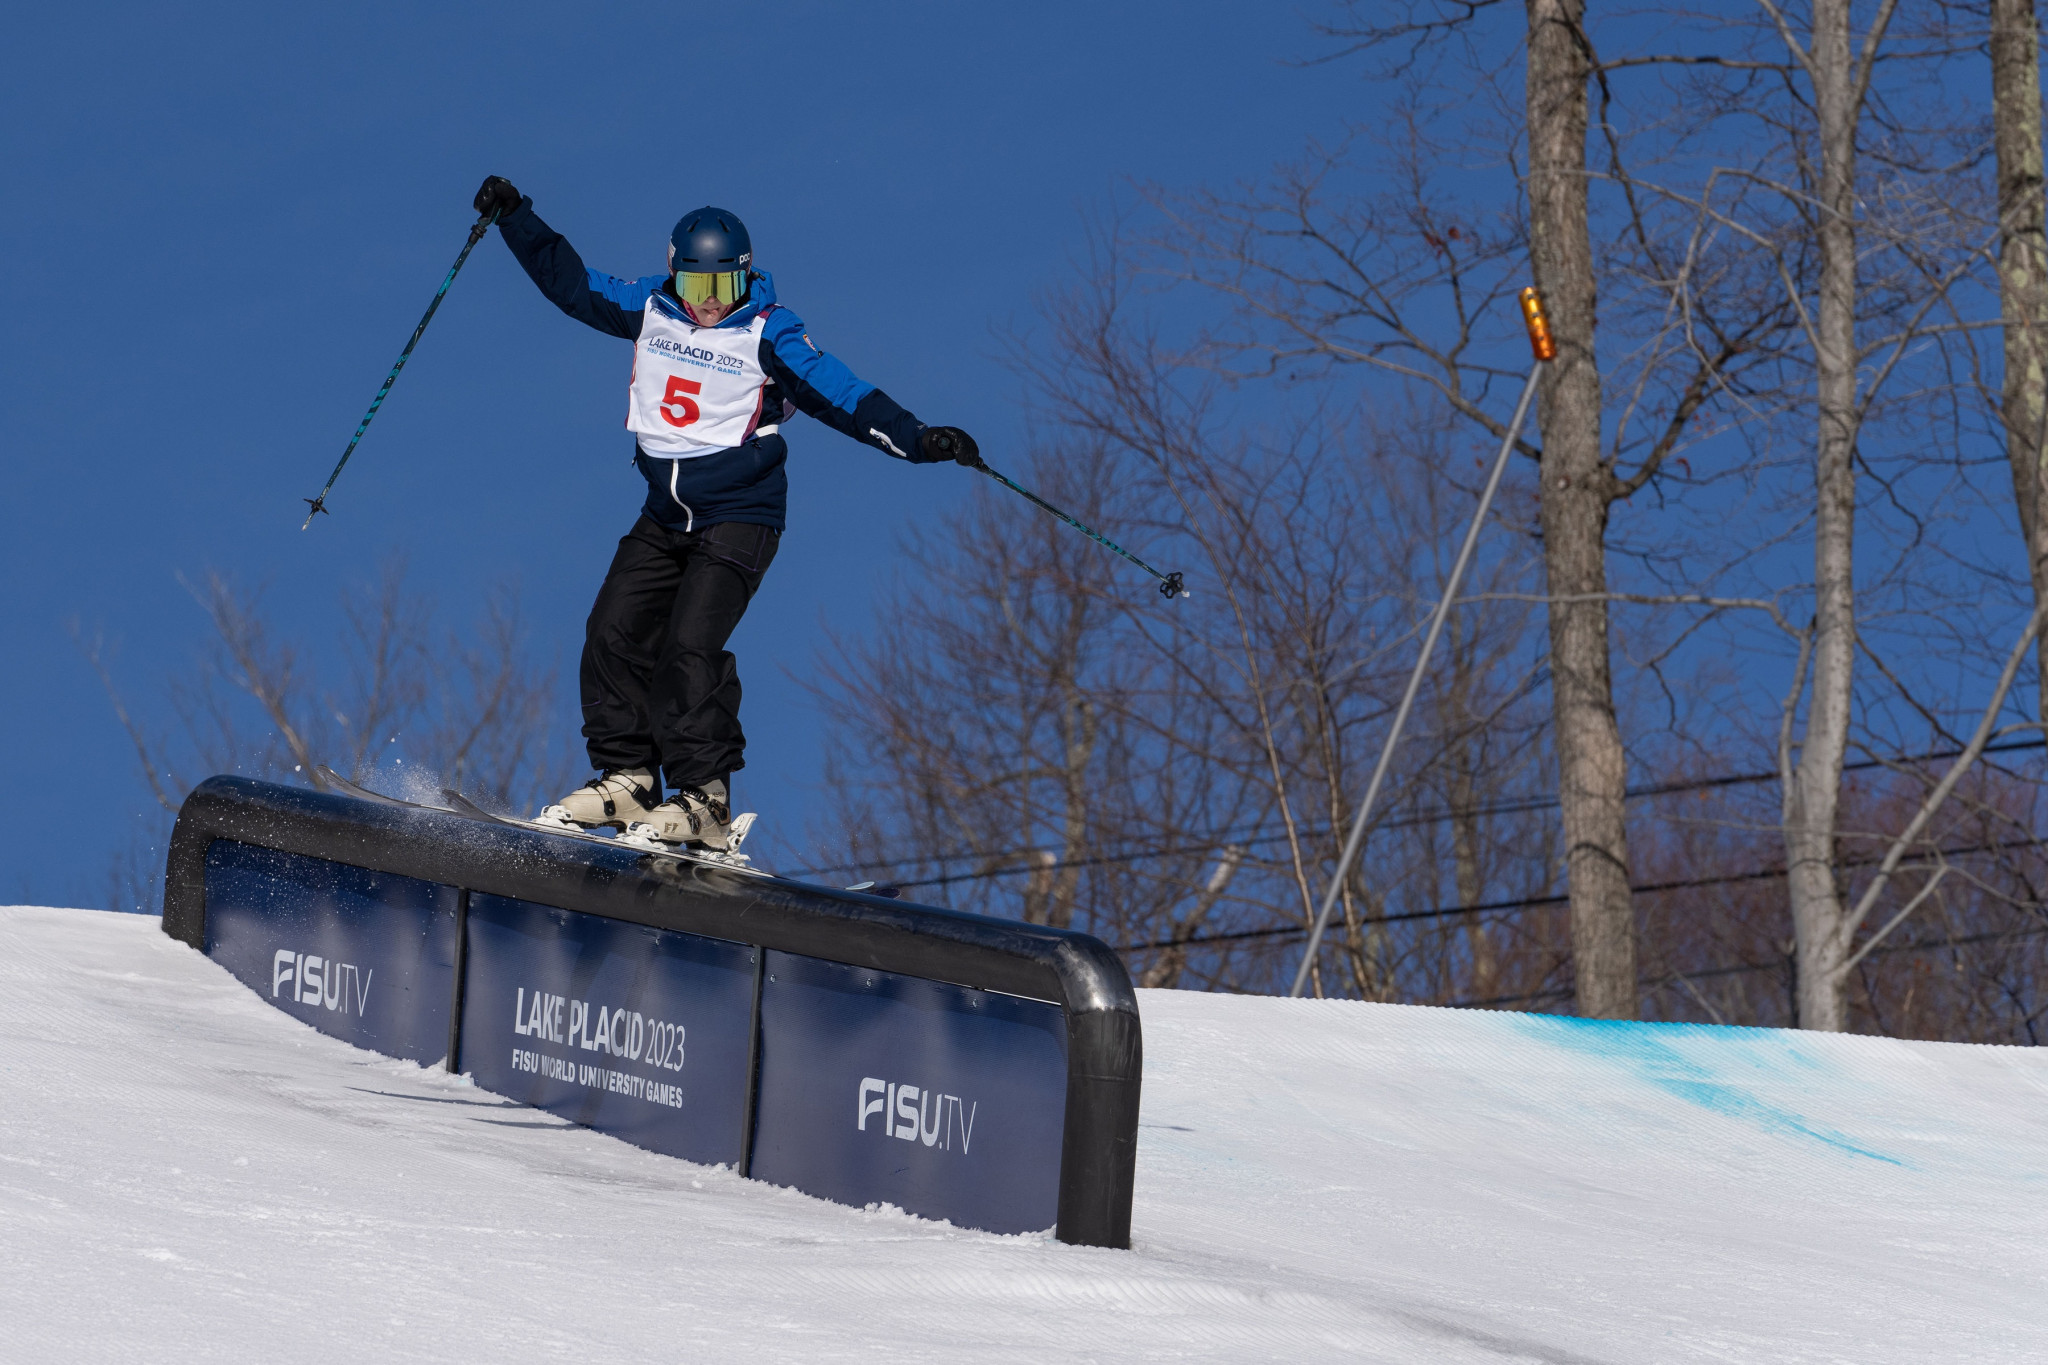 The women's freeski slopestyle final was part of a packed programme of events in Lake Placid ©FISU